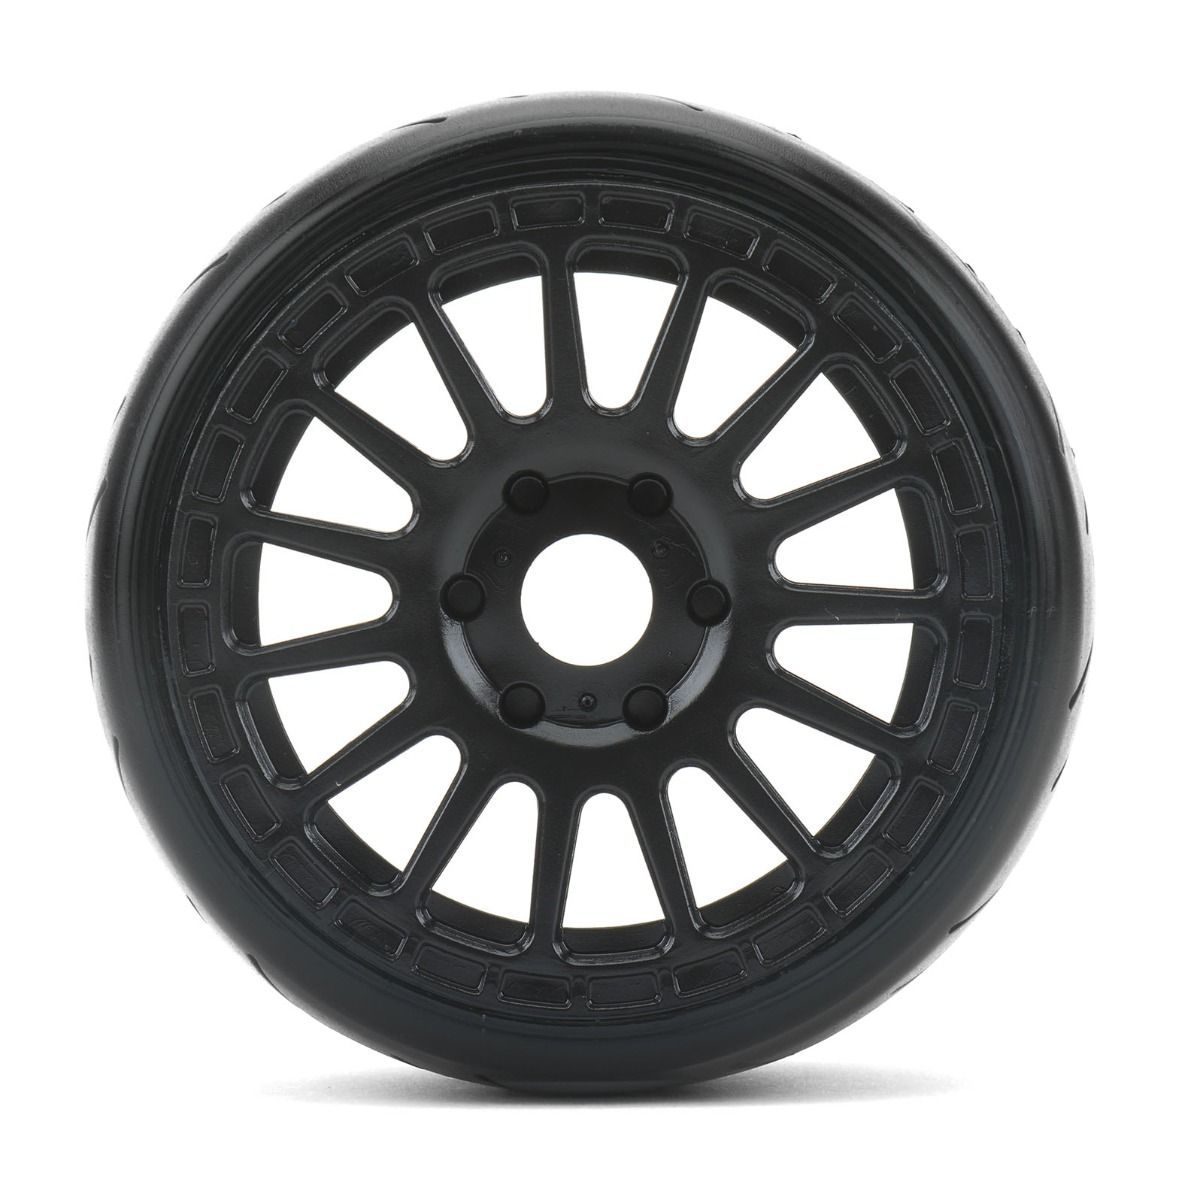 Powerhobby 1/8 GT Atomic Belted Pre-Mounted Tires 17mm Medium Compound - PowerHobby